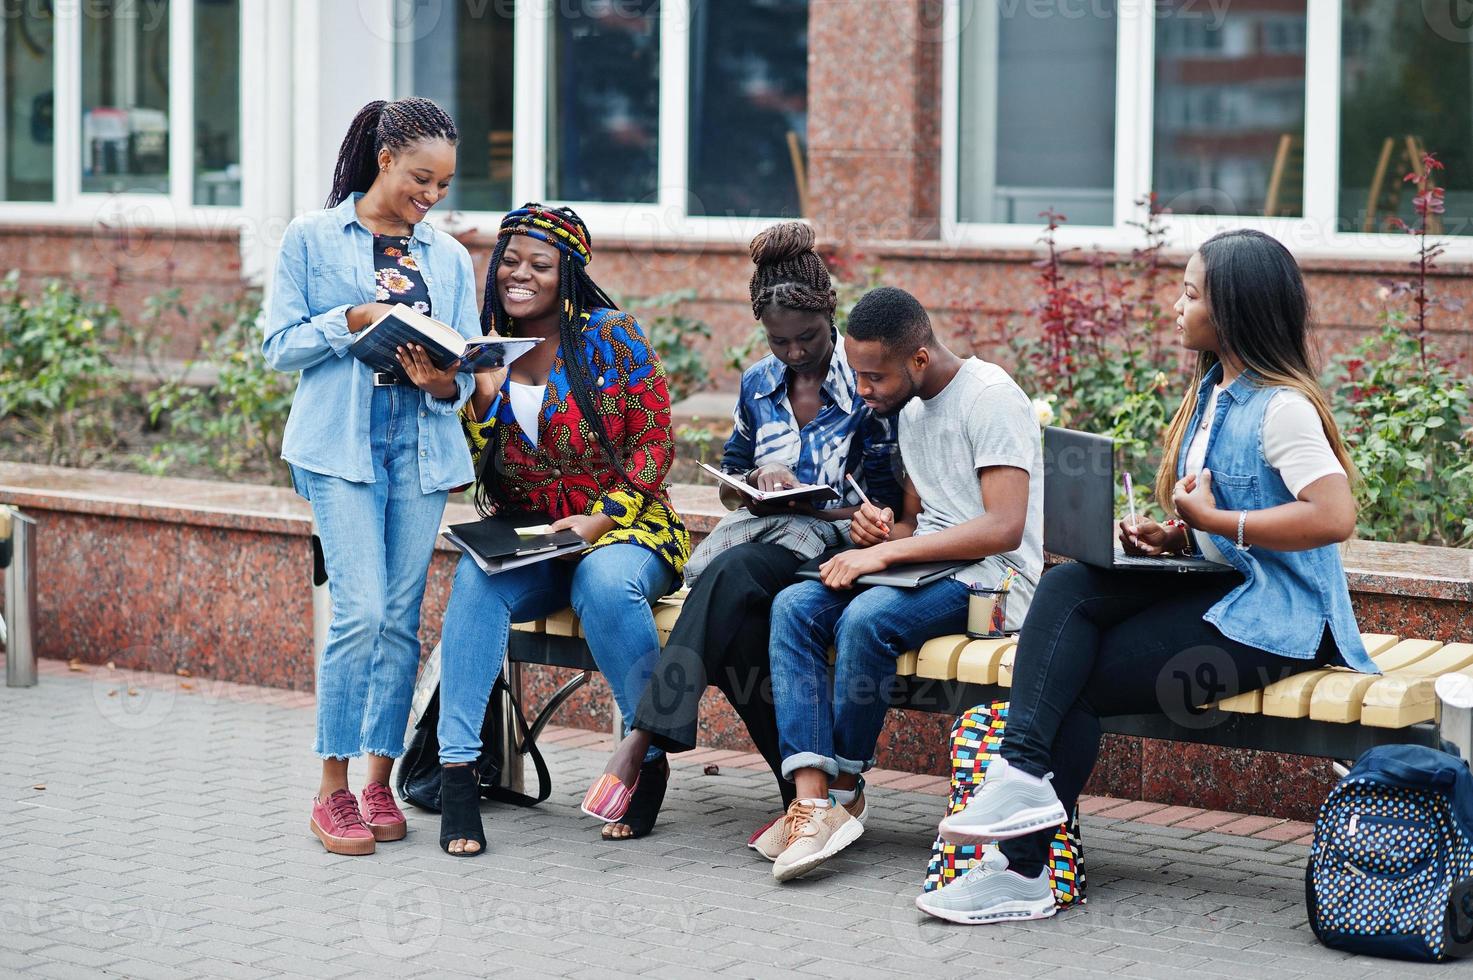 Group of five african college students spending time together on campus at university yard. Black afro friends studying at bench with school items, laptops notebooks. photo